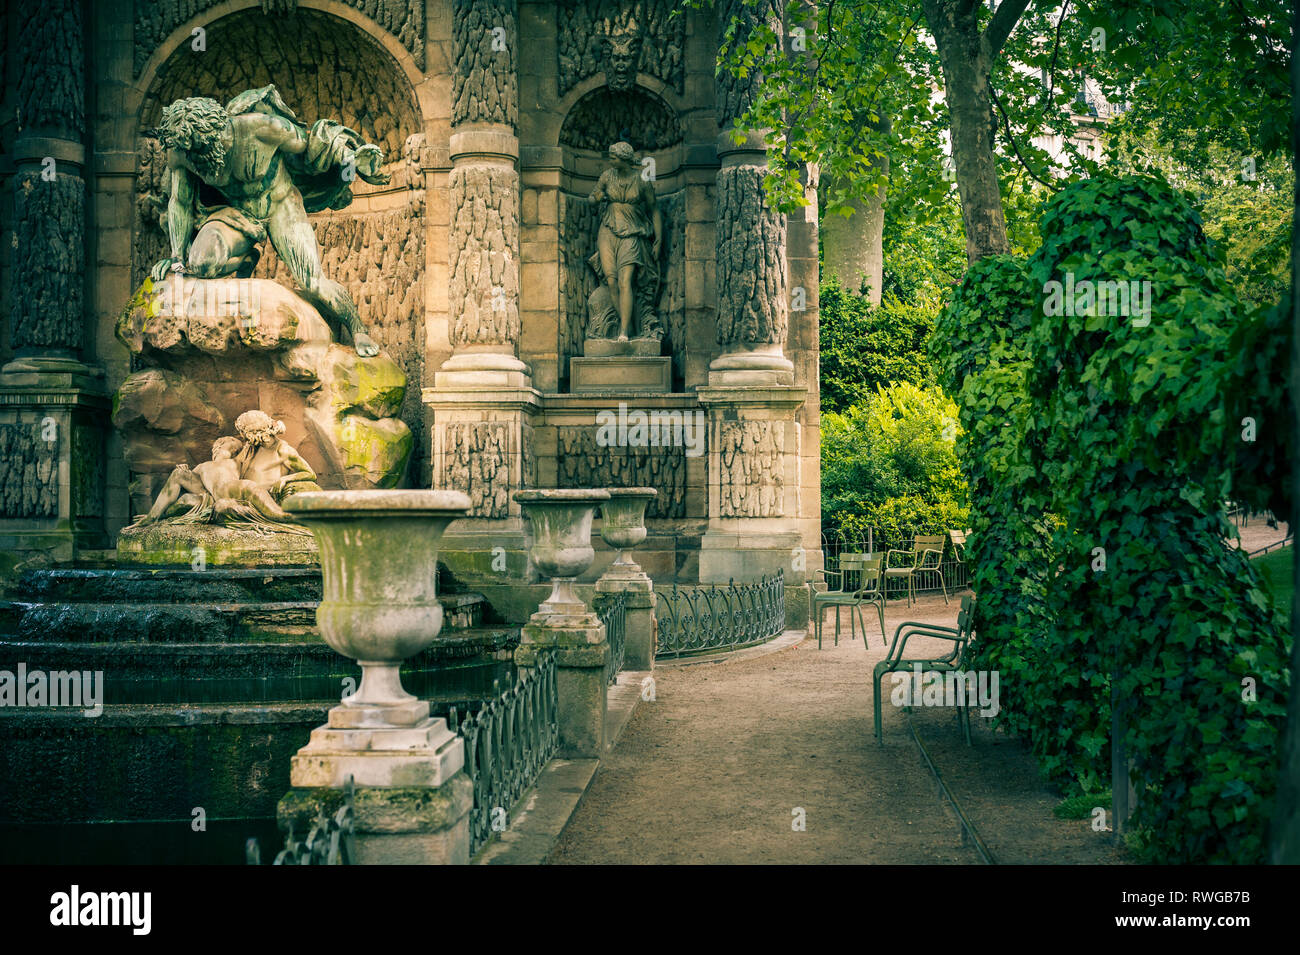 The Medici Fountain (fr La fontaine Médicis), a monumental fountain in the Jardin du Luxembourg in the 6th arrondissement in Paris. Stock Photo